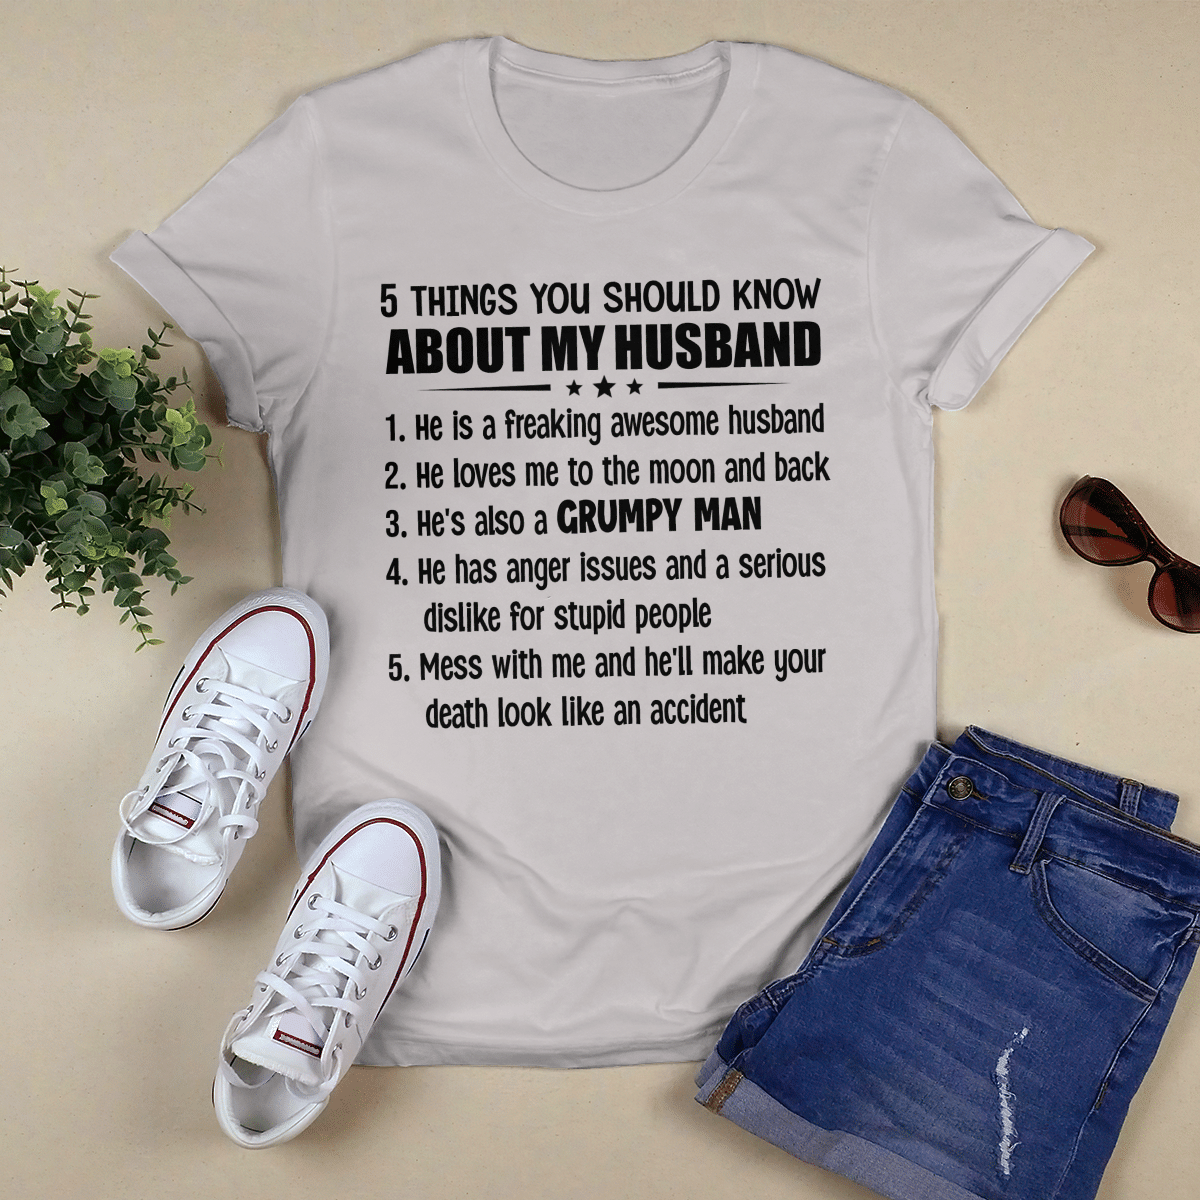 5 Things You Should Know About My Husband shirt